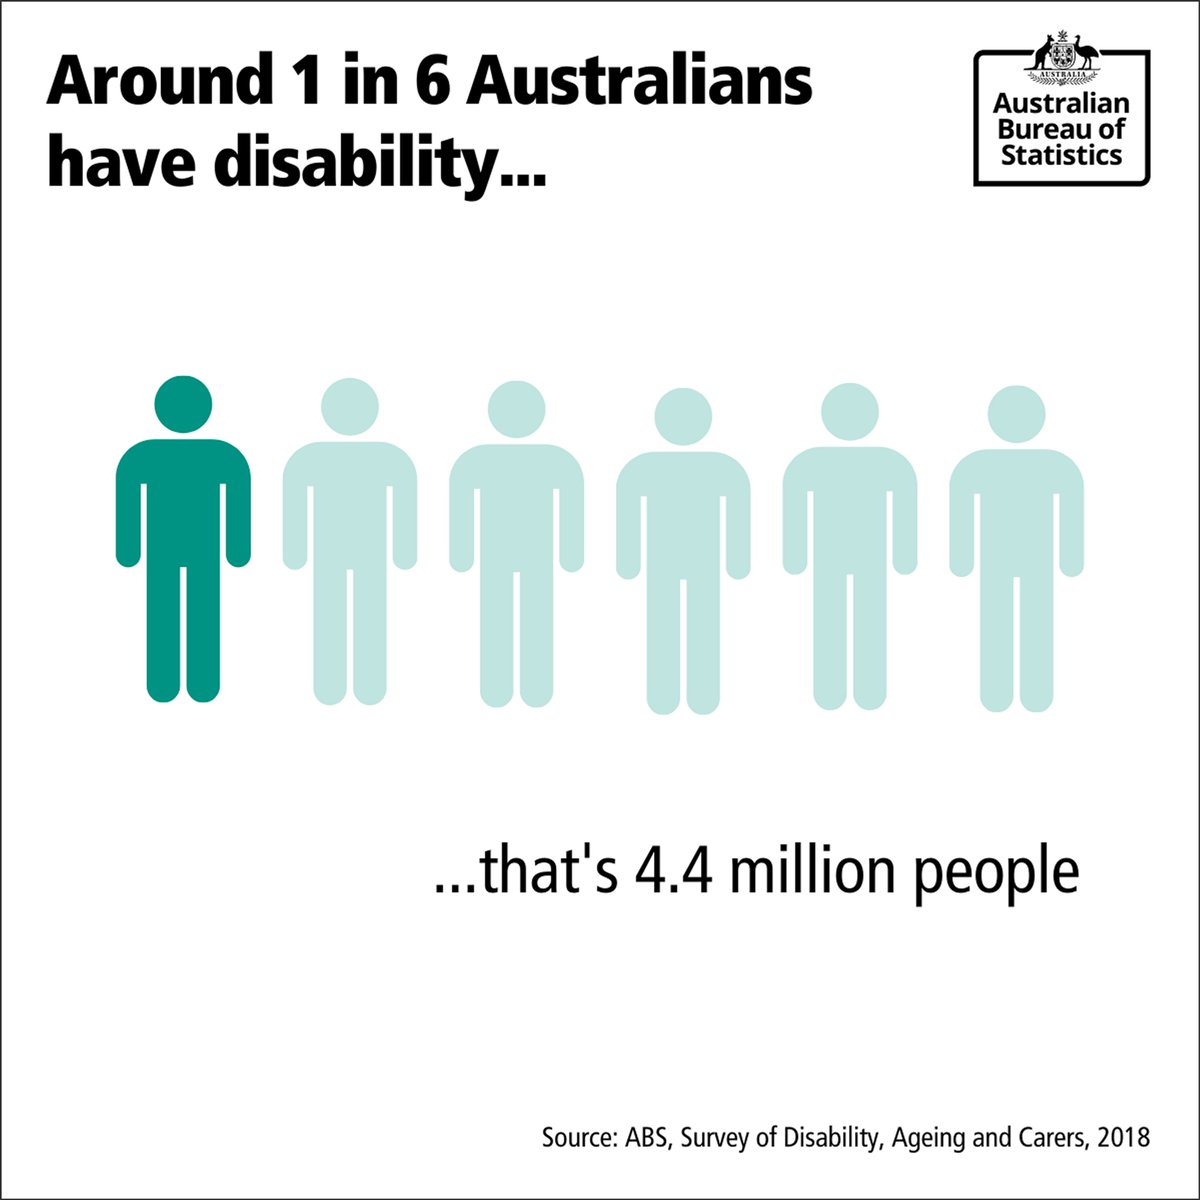 Today is #GlobalAccessibilityAwarenessDay , a day to learn about digital access and inclusion for everyone with disability or impairment. In 2018 there were 4.4 million (around 1 in 6) Australians with disability.